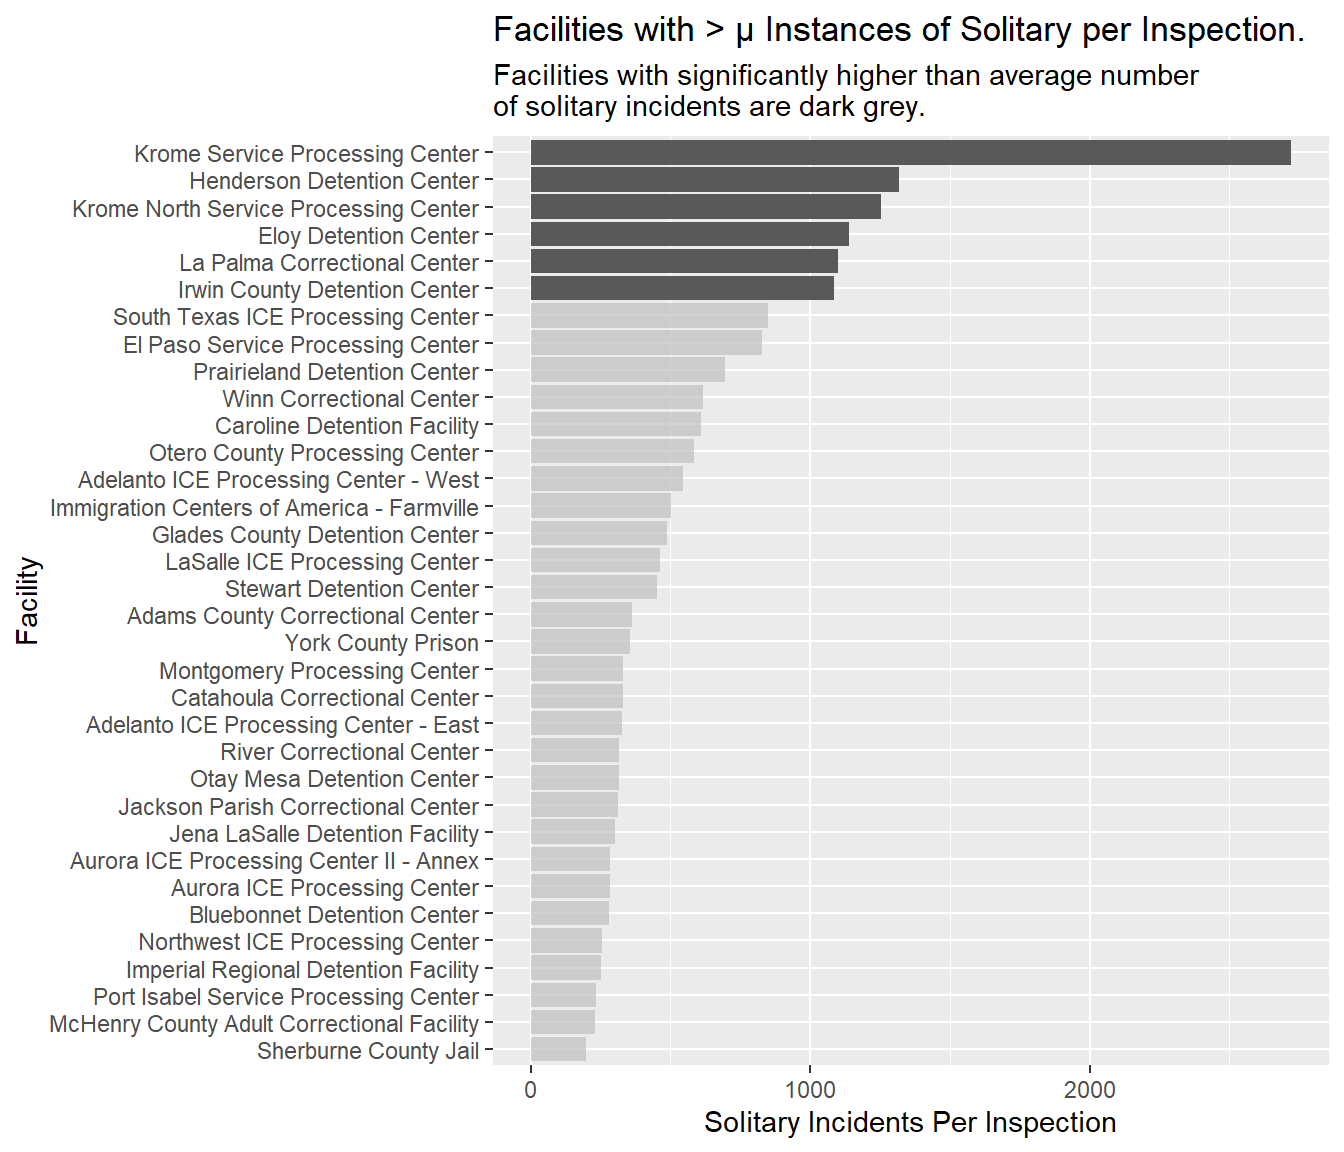 Bar plot of facilities with greater than average number of instances of solitary > 60 days.